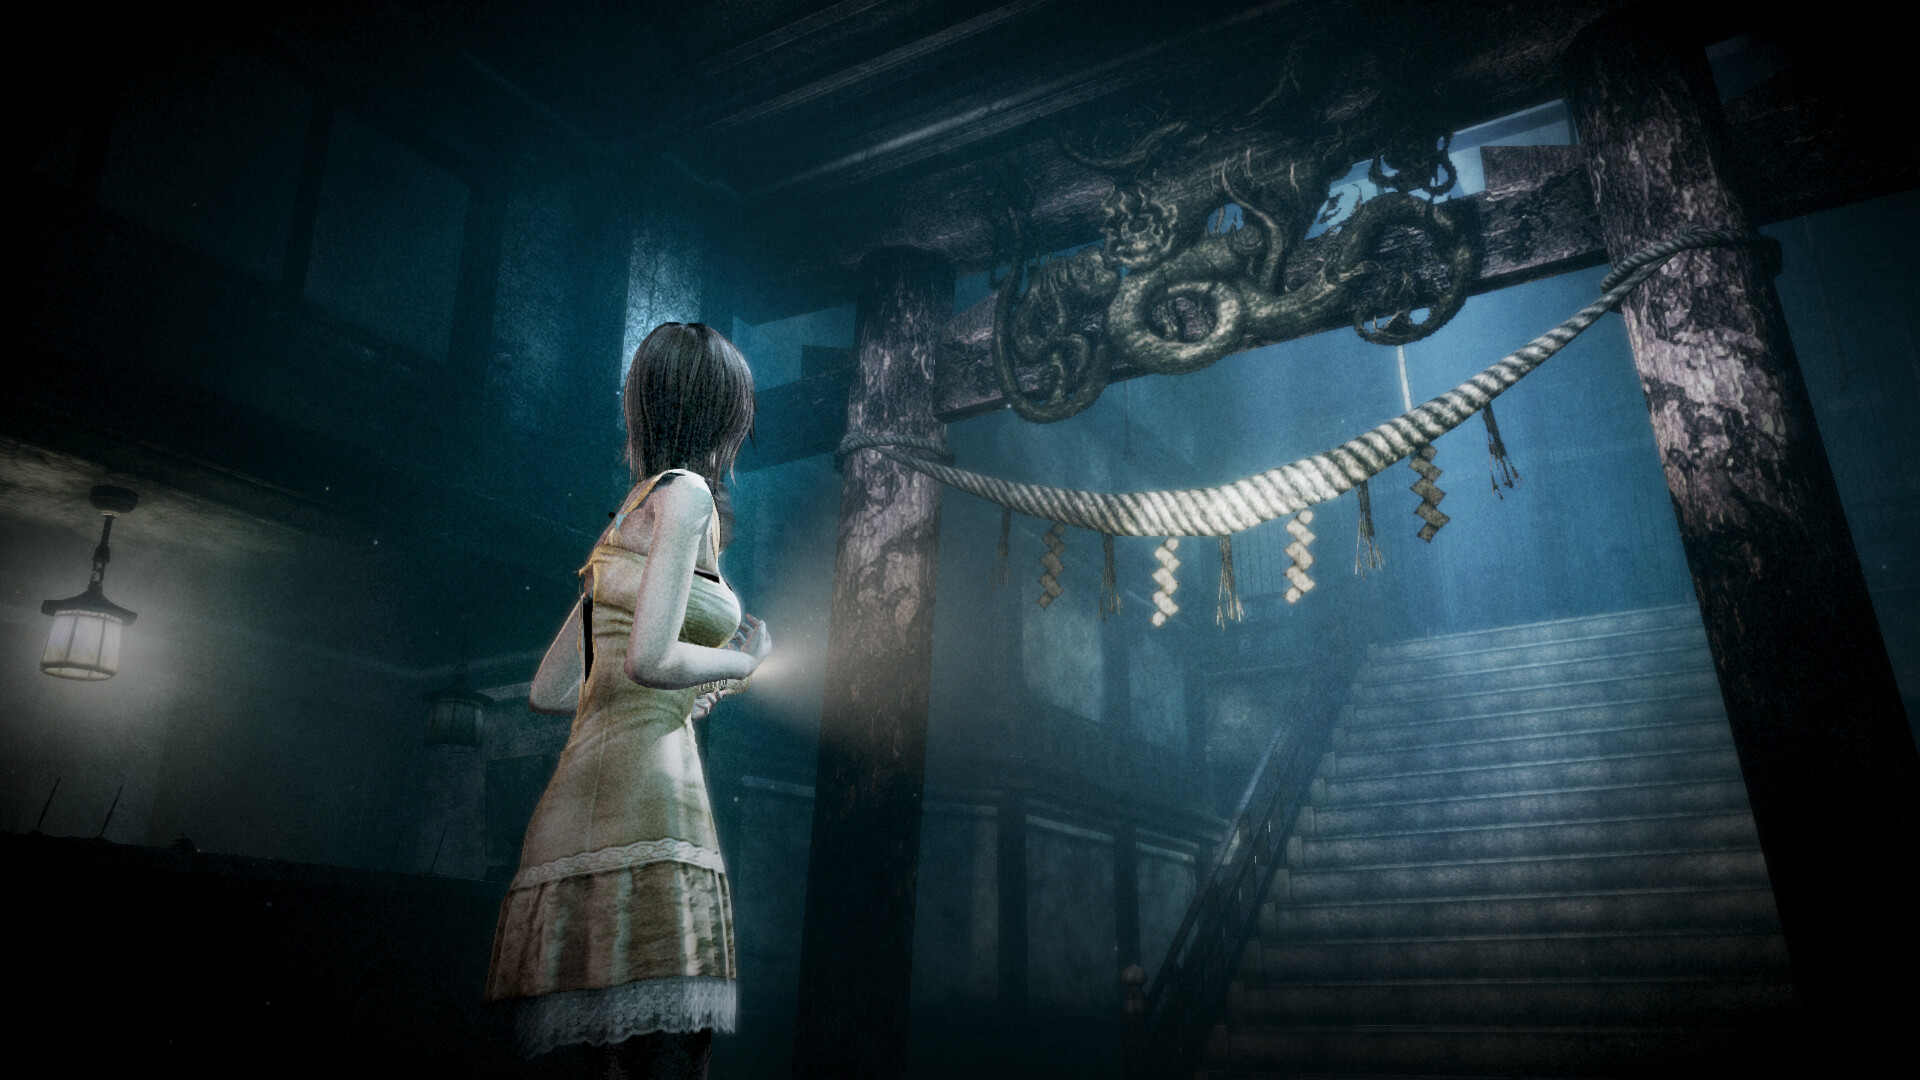 (16.94$) FATAL FRAME / PROJECT ZERO: Mask of the Lunar Eclipse Steam Account